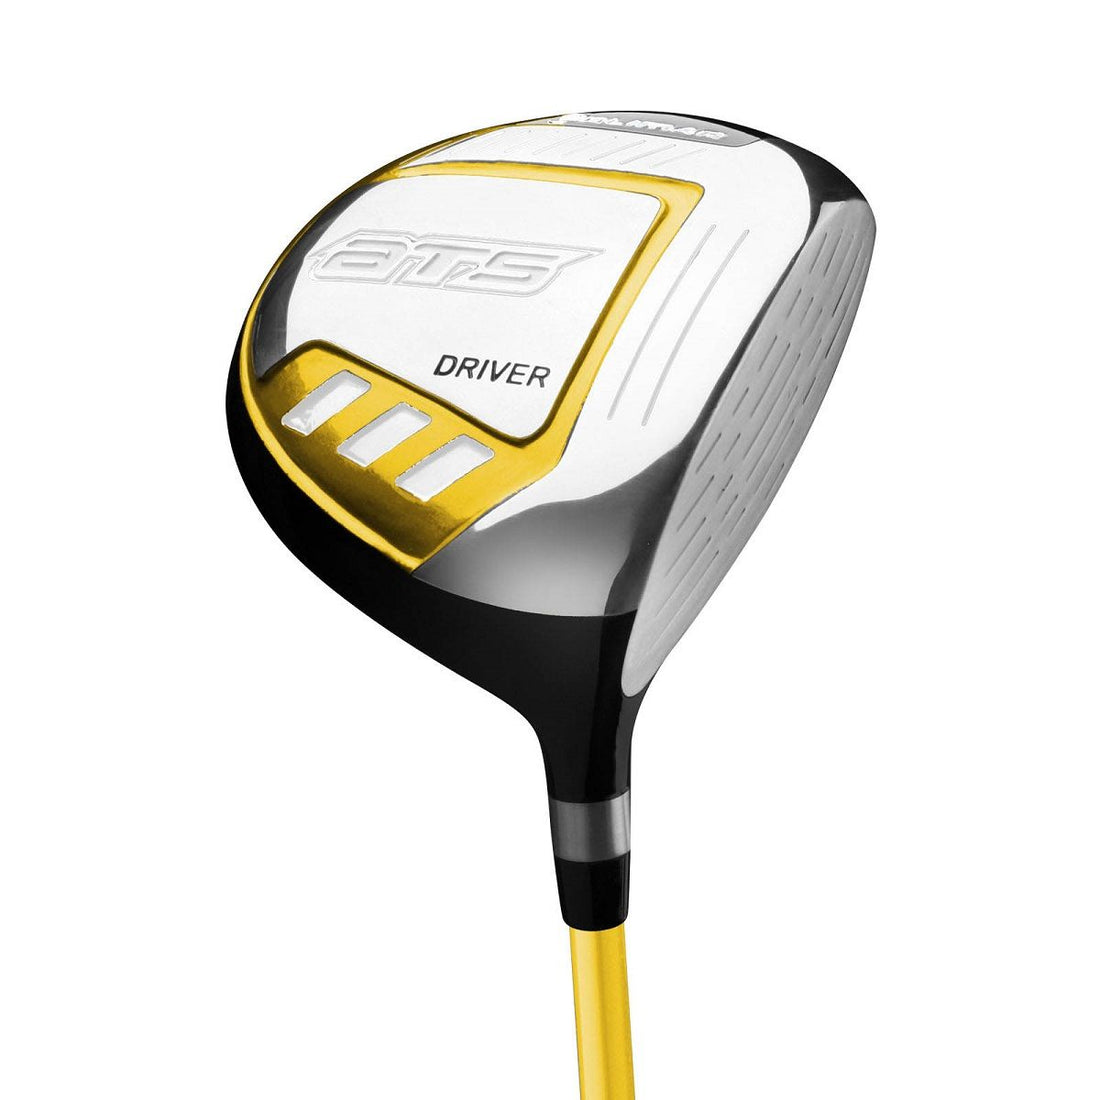 Angled sole view of Orlimar ATS Junior Yellow Series driver for Ages 3 and under